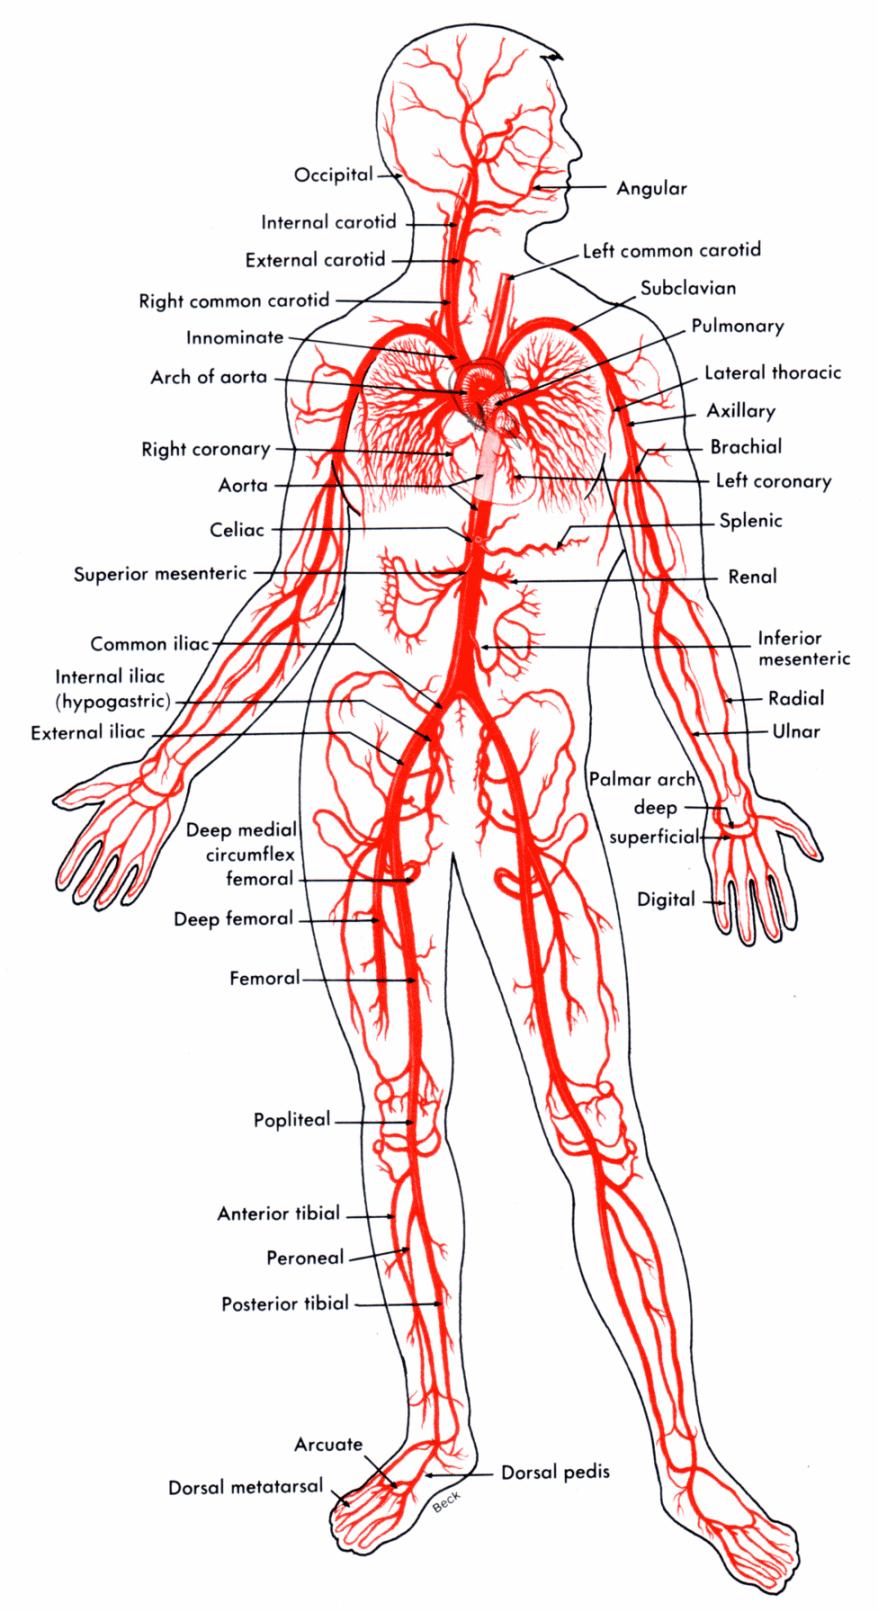 Vessels of the circulatory system ARTERIES Functions of arteries: Carry oxygenated blood away from